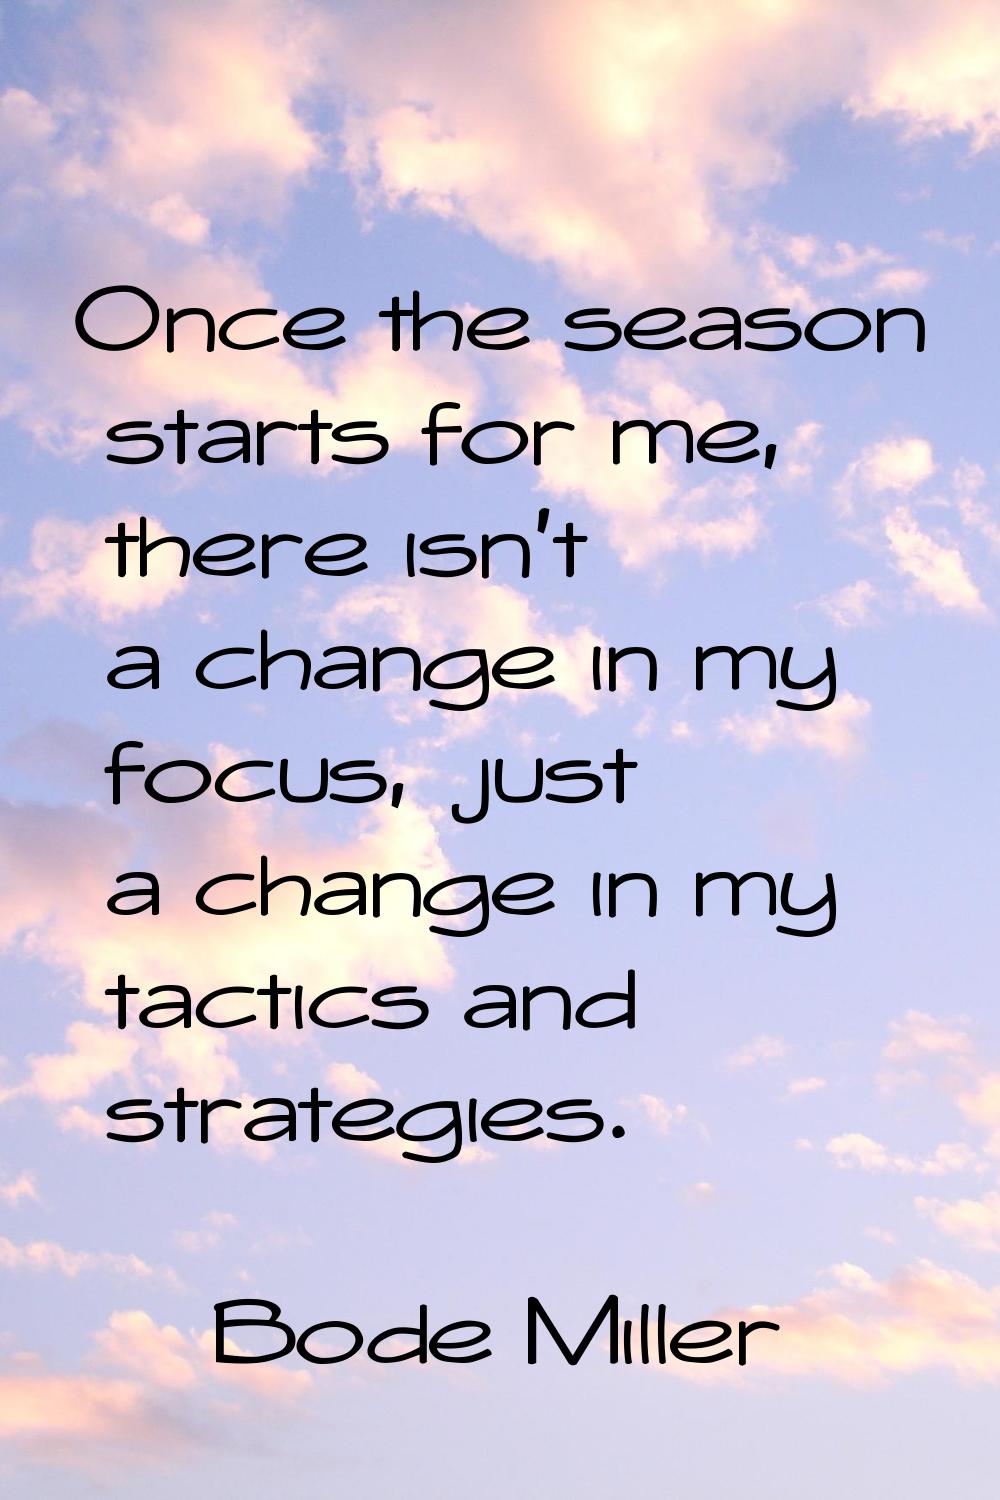 Once the season starts for me, there isn't a change in my focus, just a change in my tactics and st